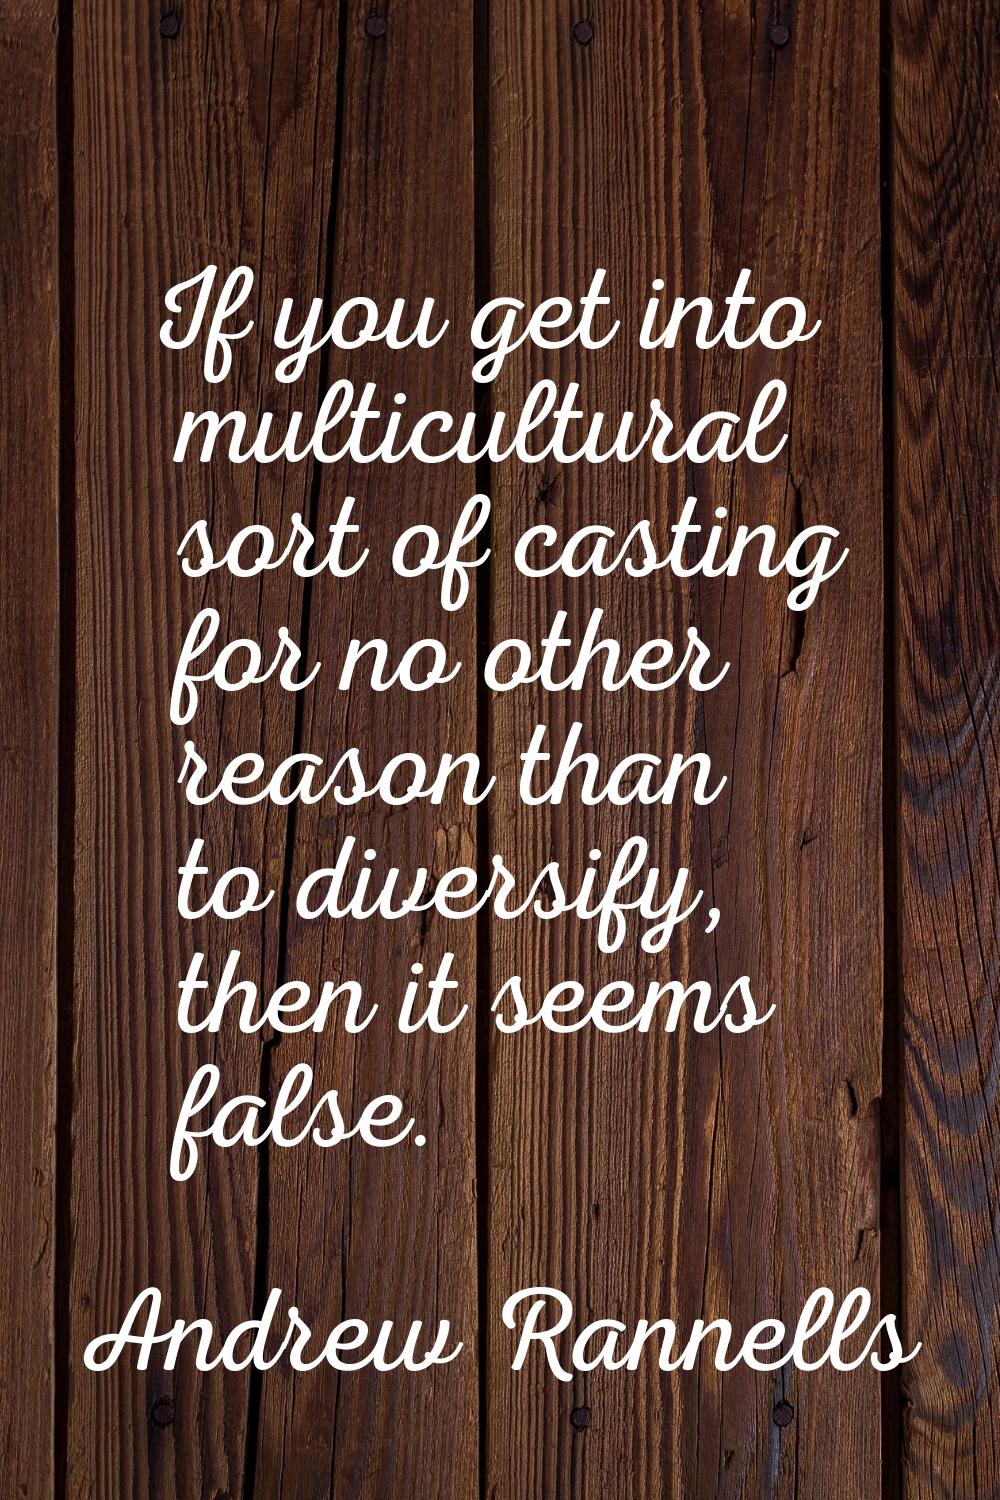 If you get into multicultural sort of casting for no other reason than to diversify, then it seems 